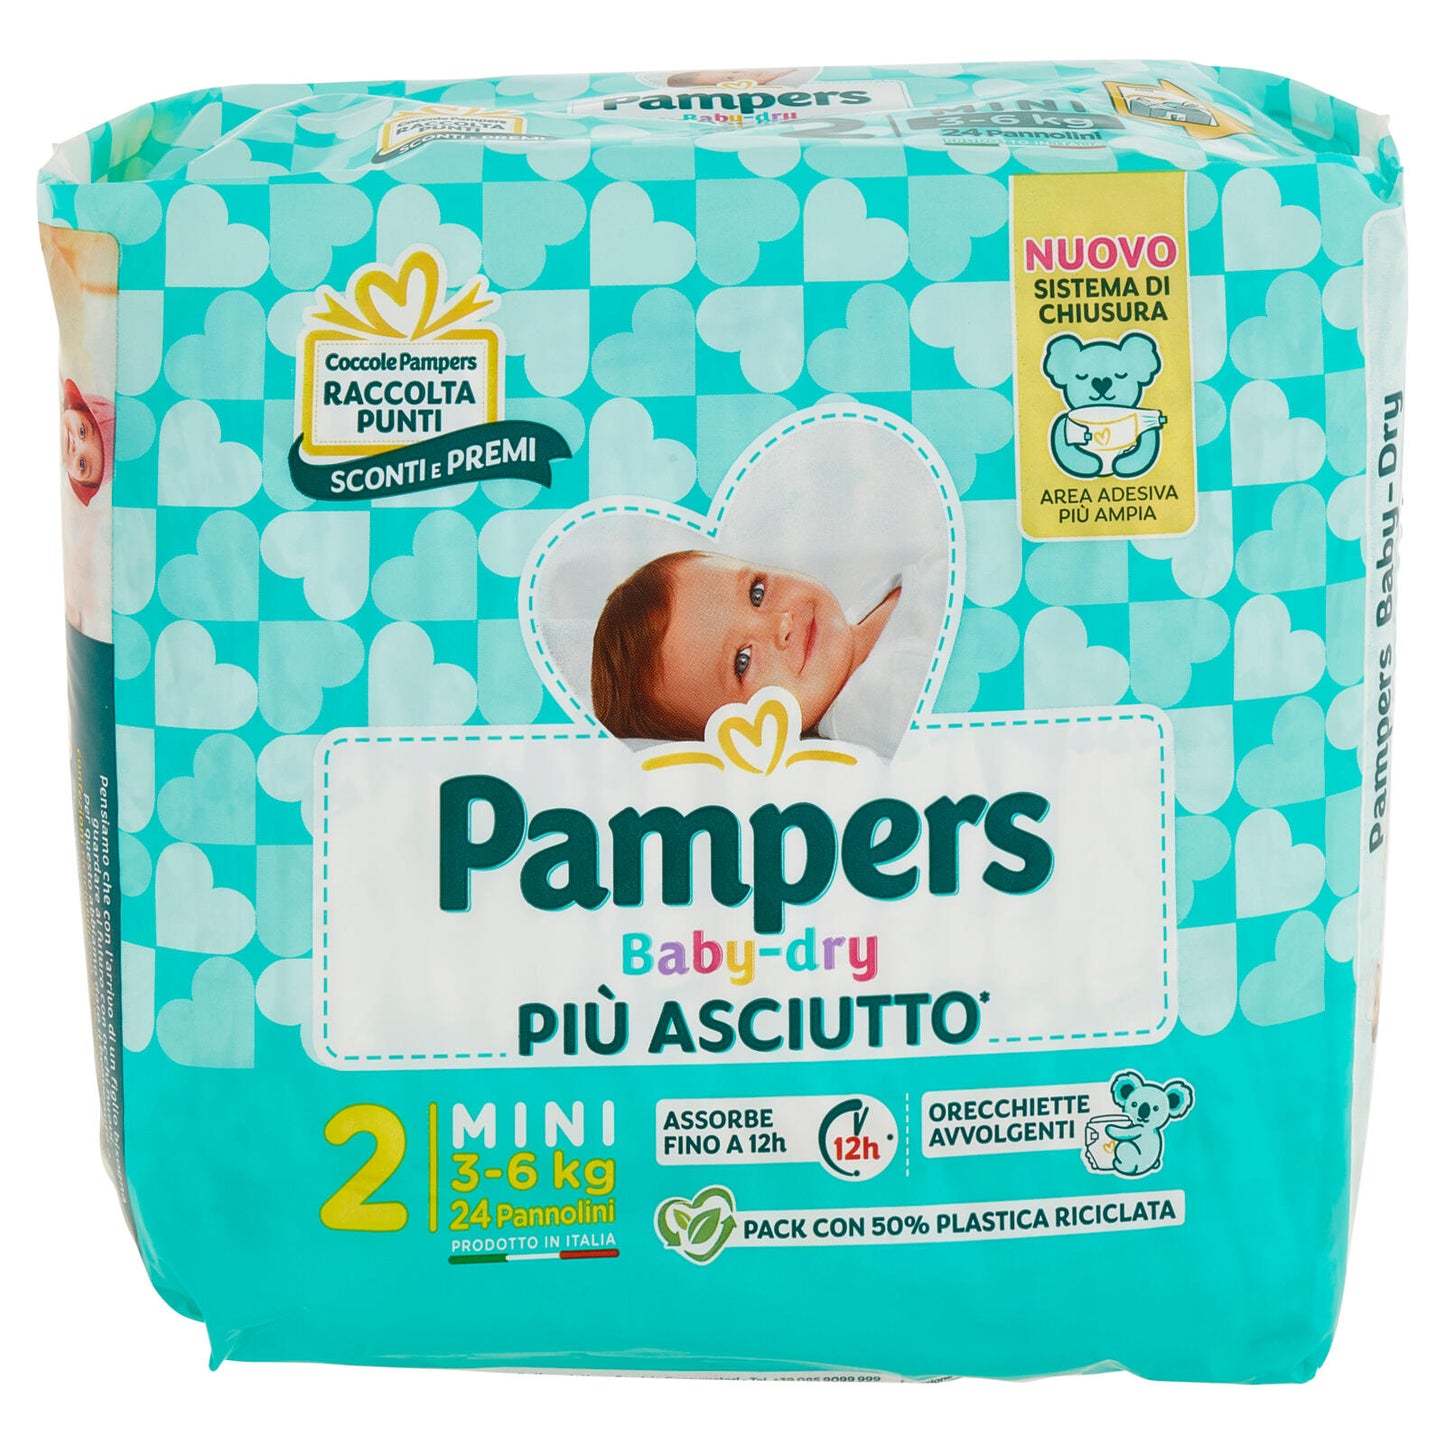 Pampers Baby-dry Mini 24 pz